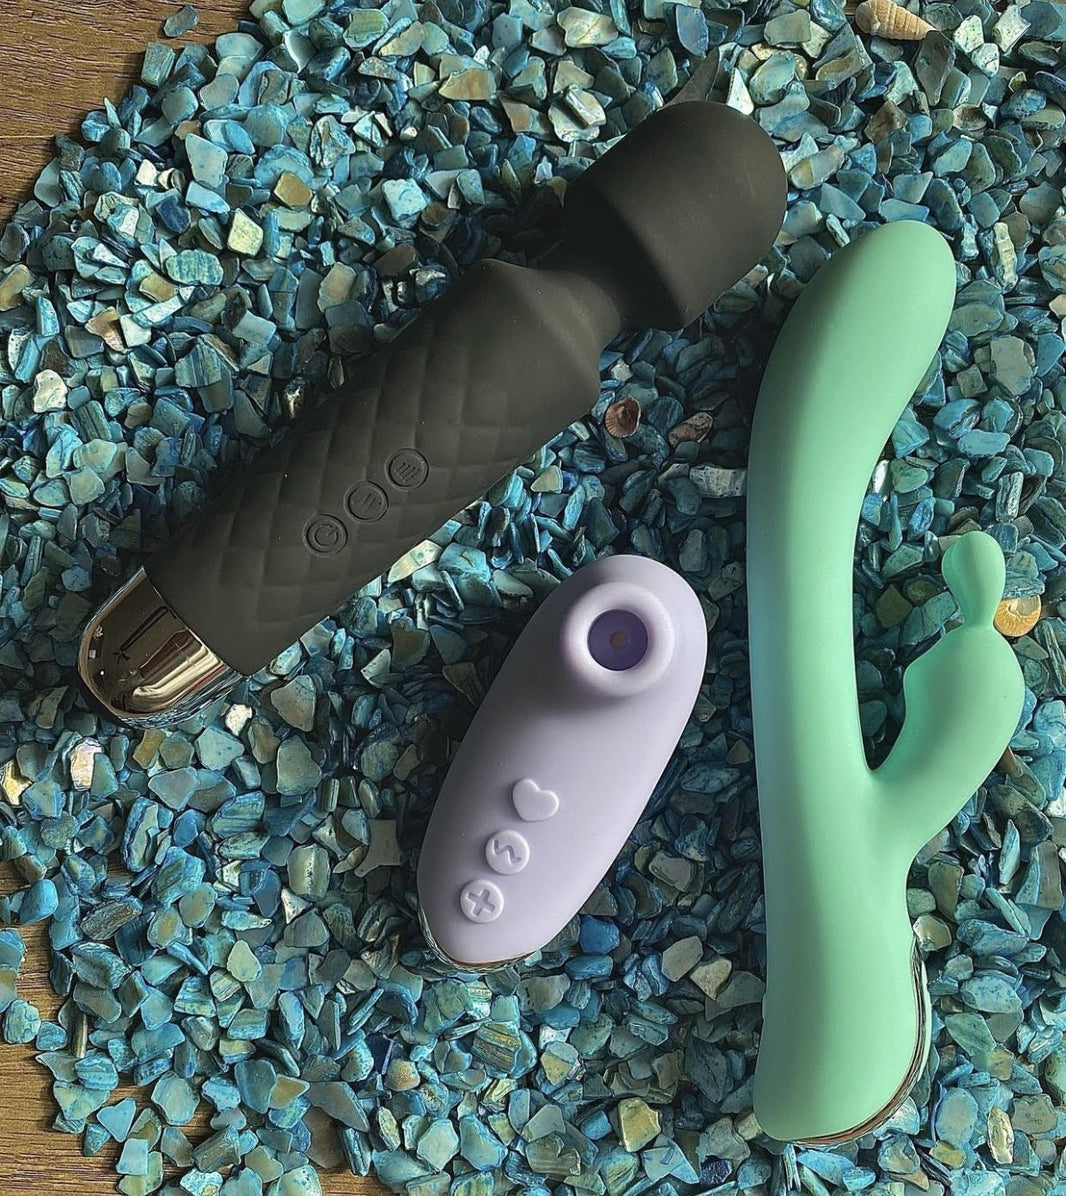 9 Ways a Vibrator Can Change Your Life - NRN Specialties